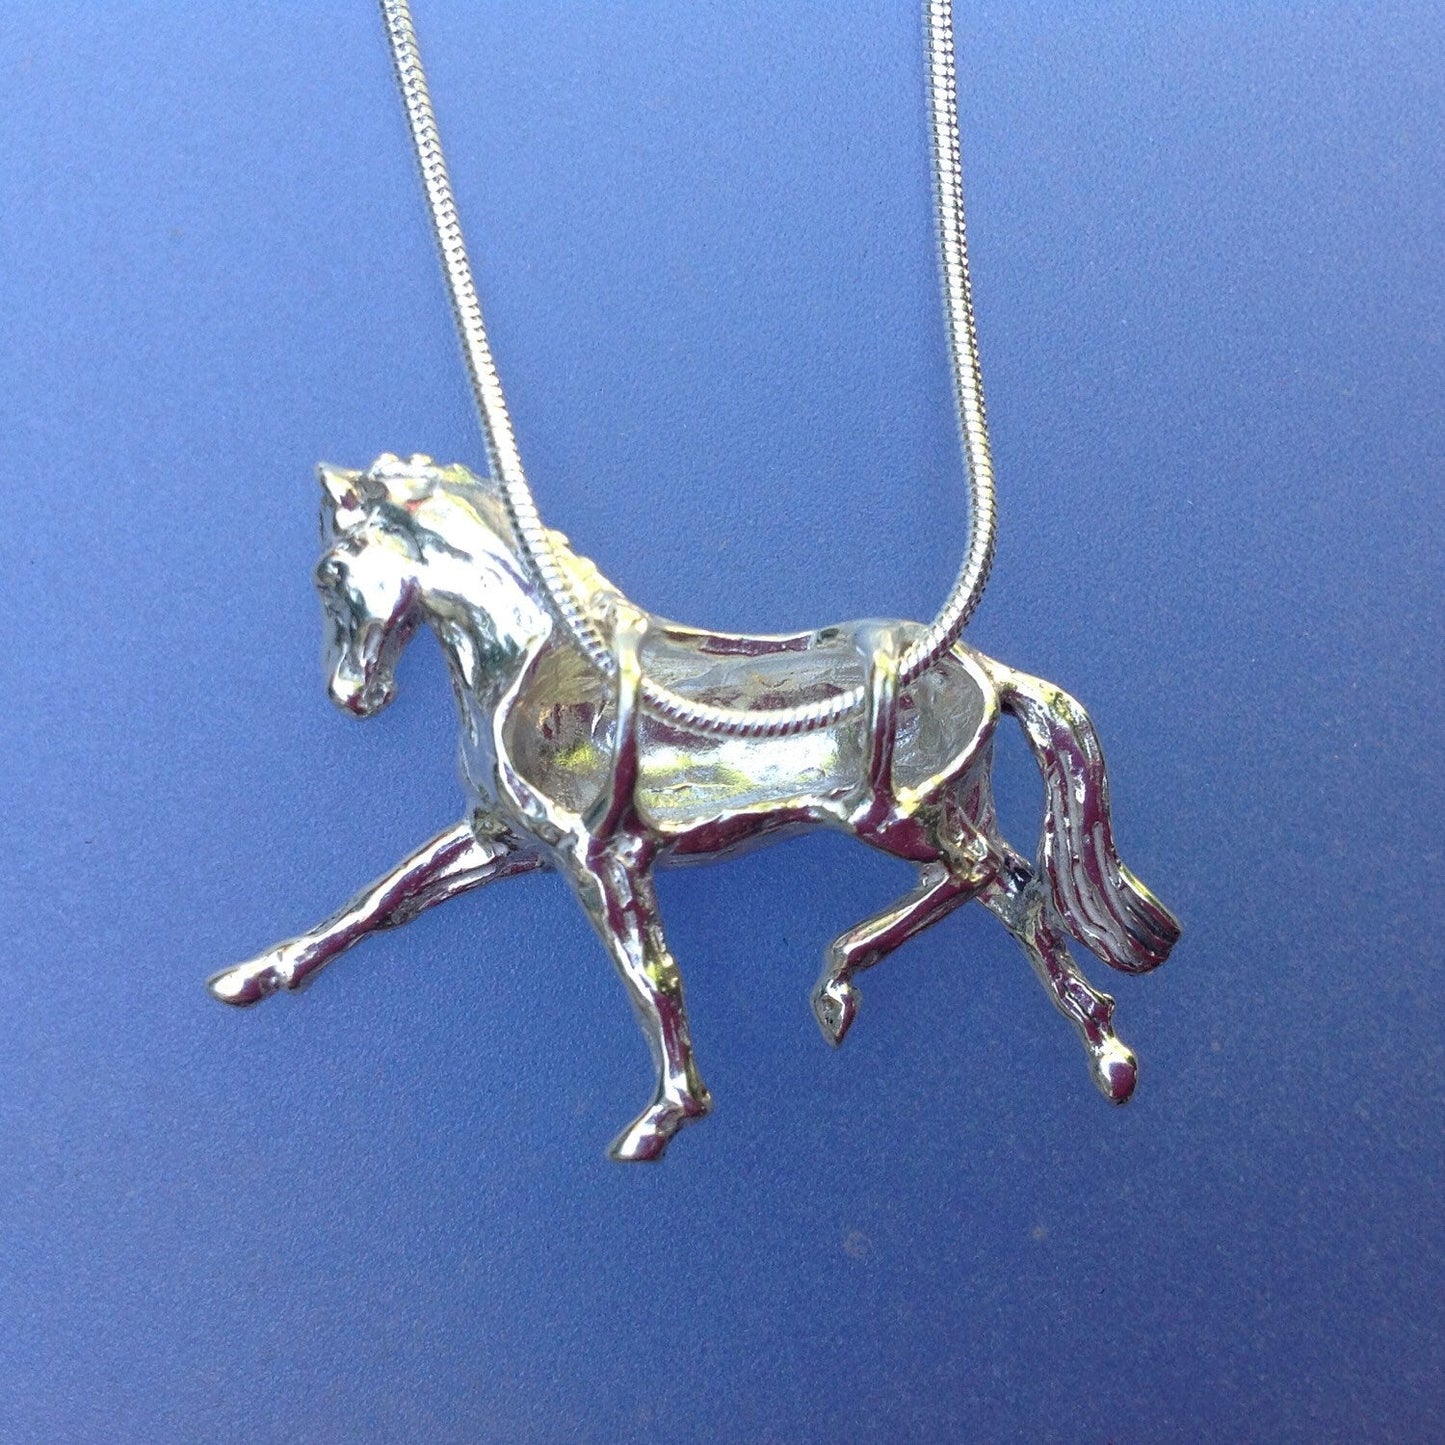 Dressage horse  extended trot necklace  STERLING SILVER pendant ONLY Equestrian jewelry gift